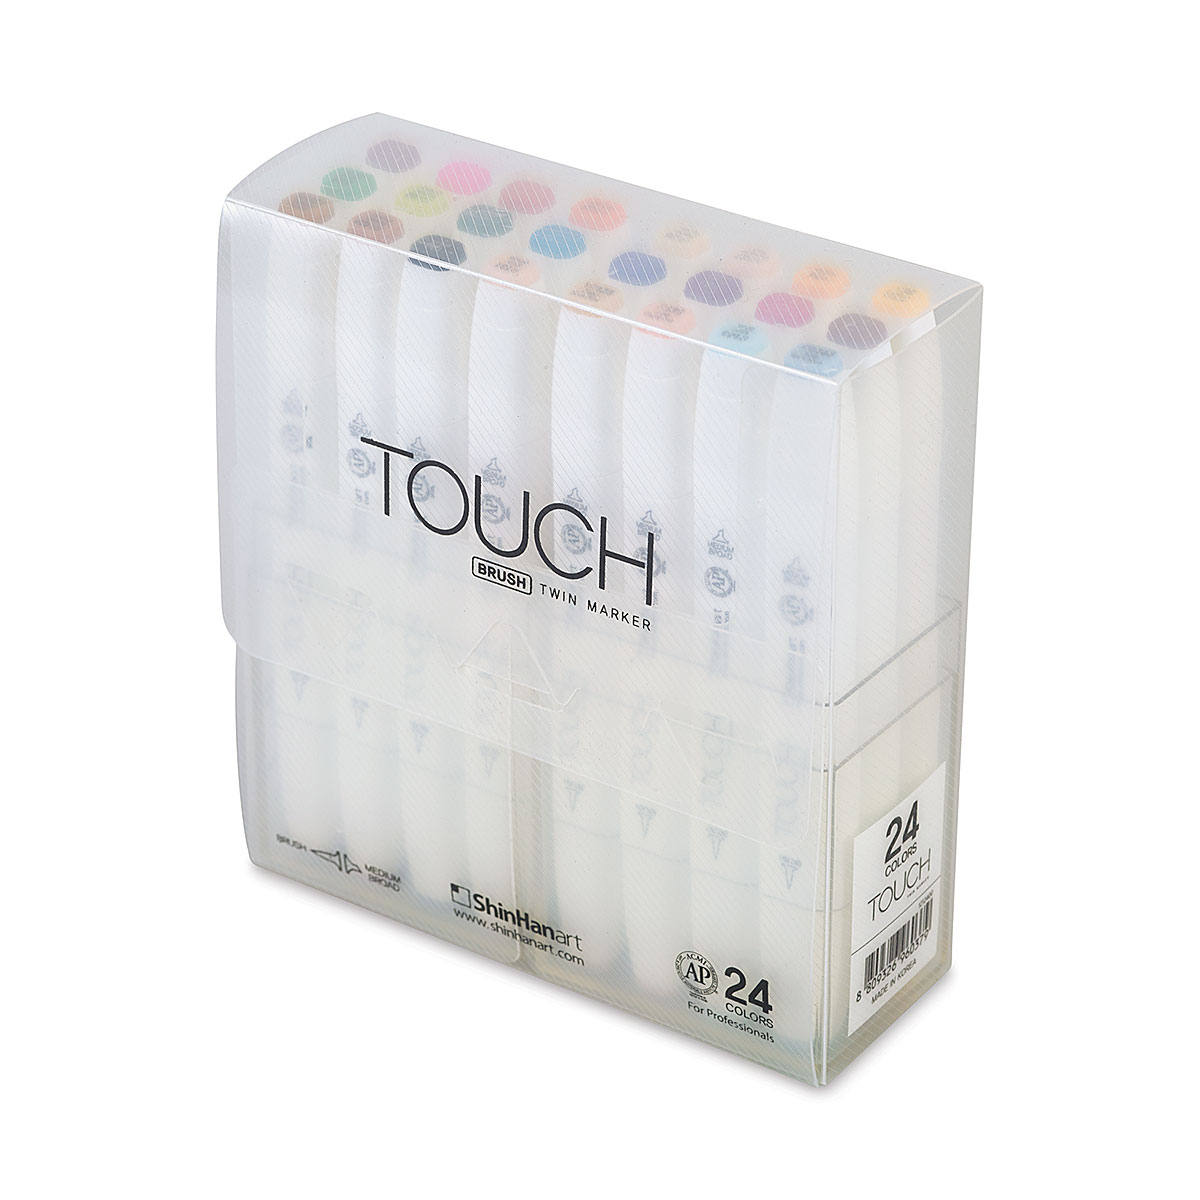 TOUCH™ Twin Marker 204 Colors Complete Set - Aluminum Limited Edition